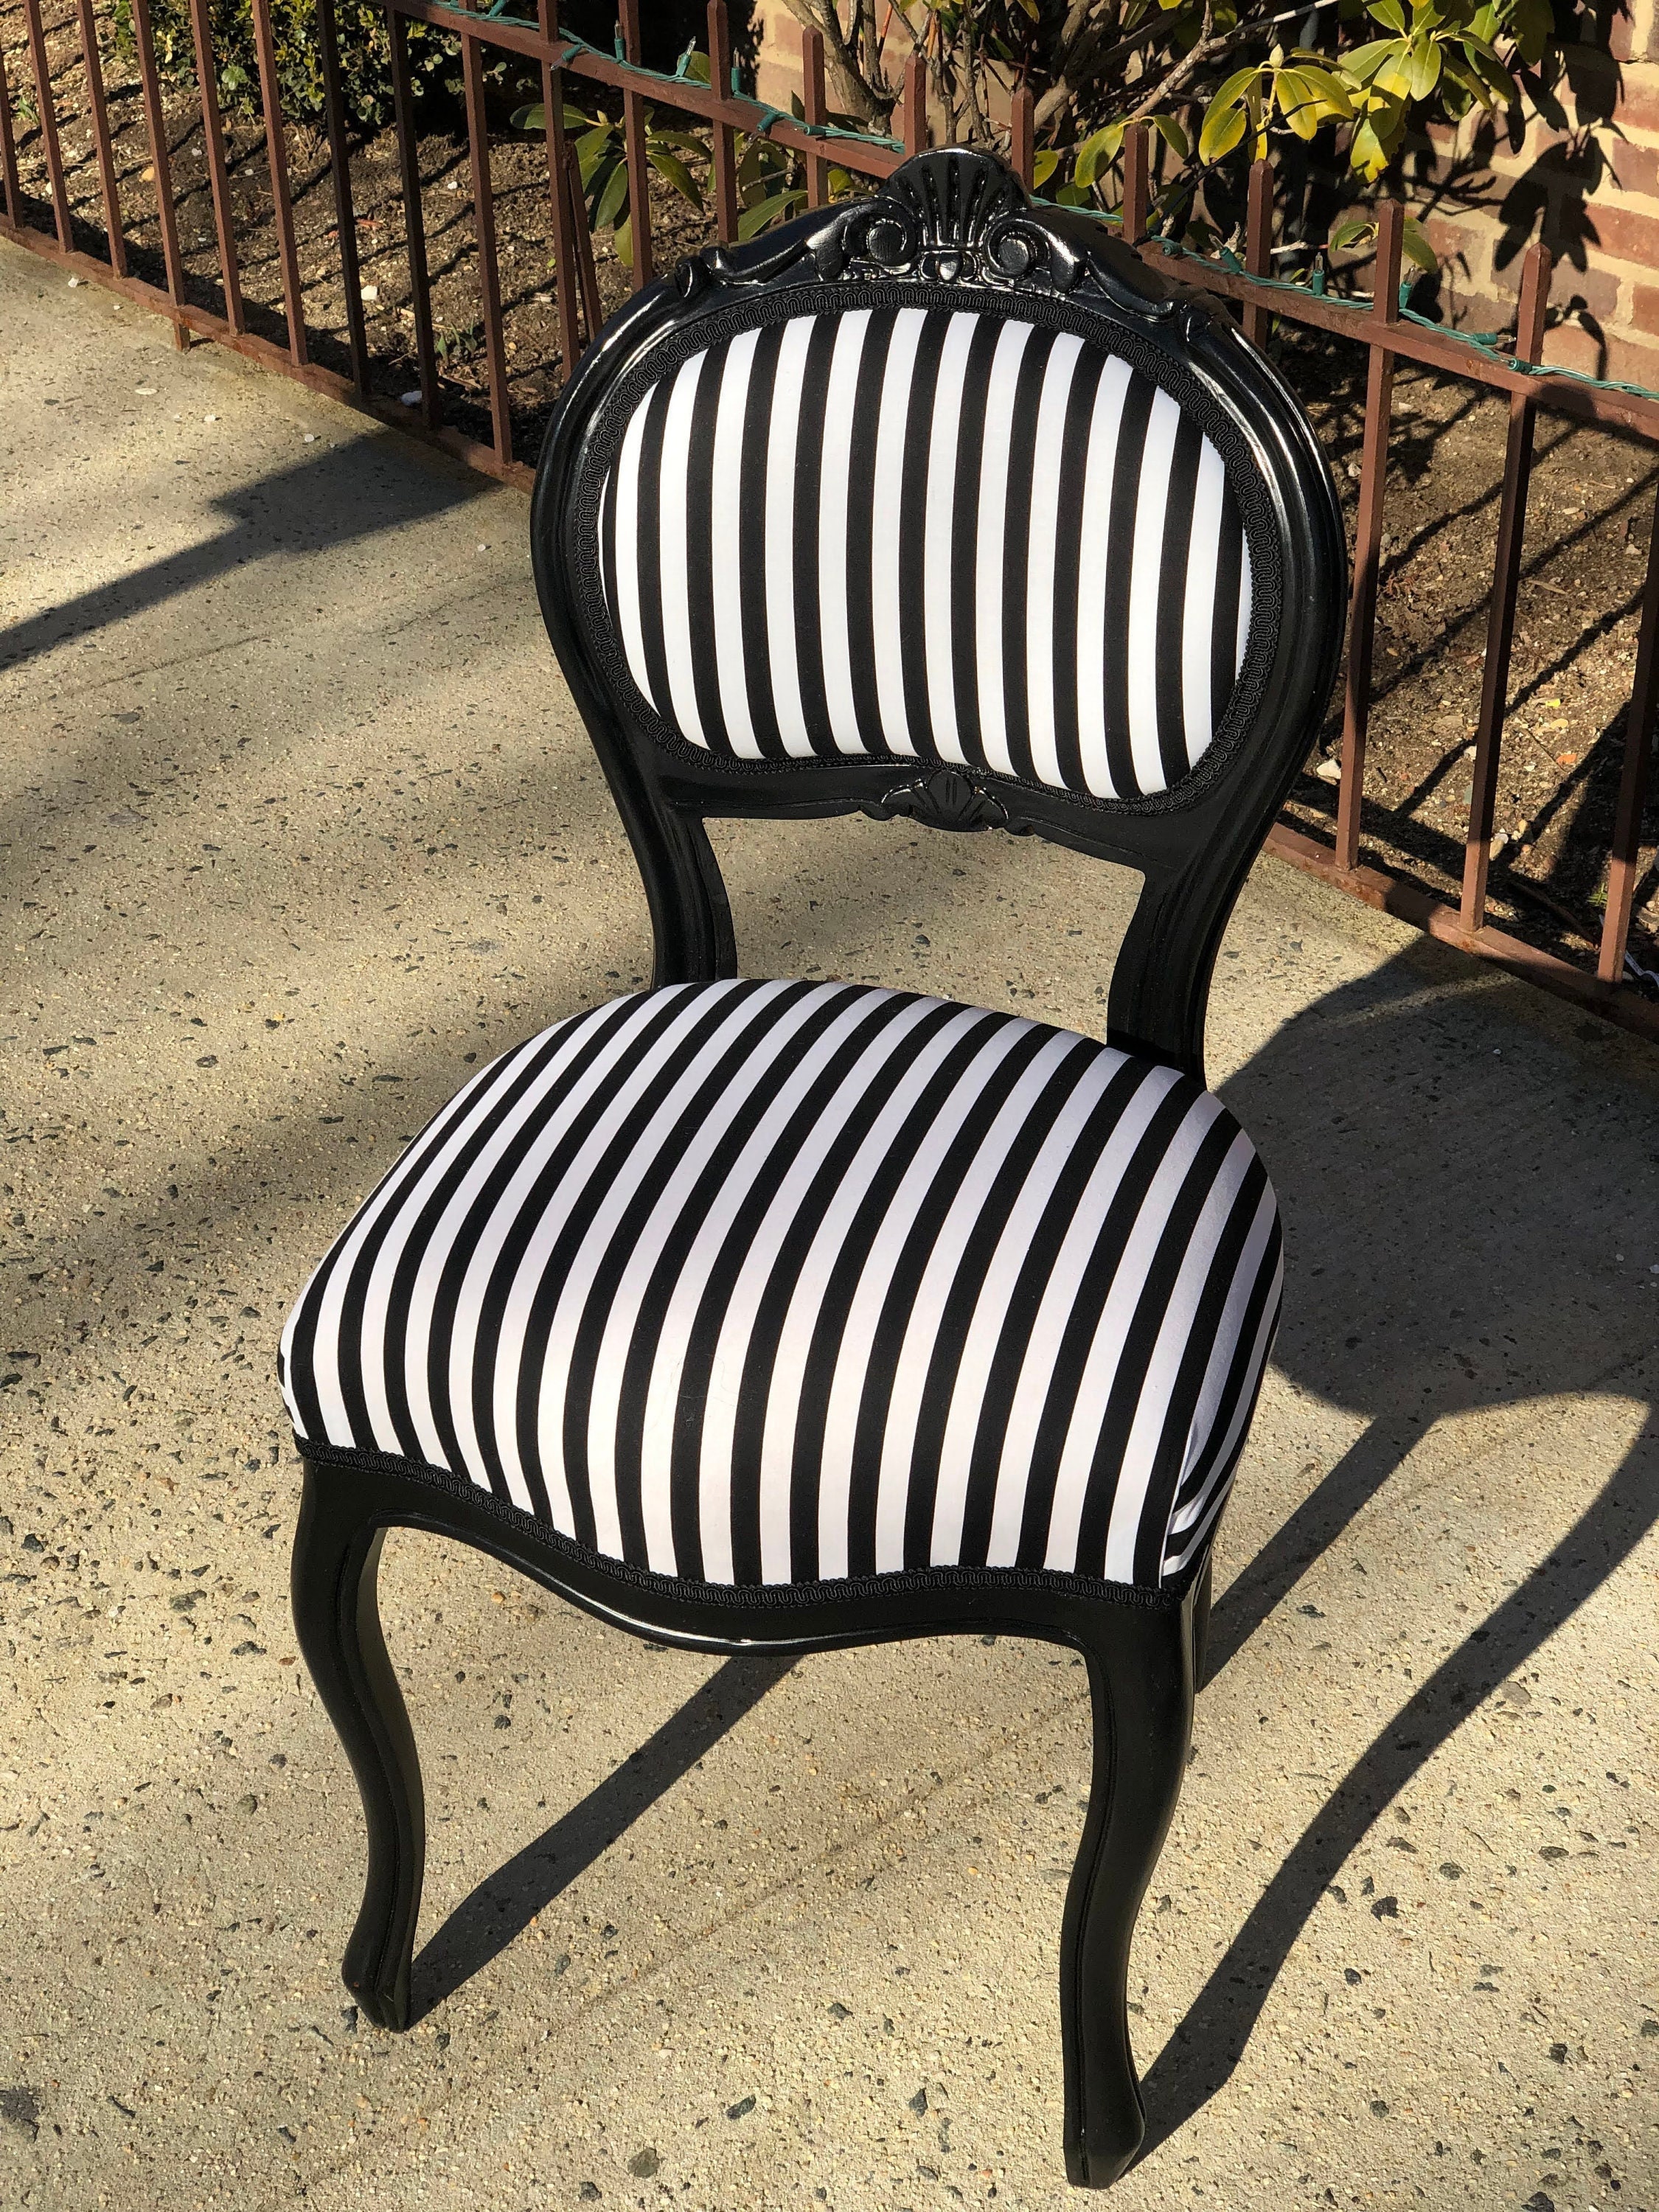 Black and White Striped Accent Chair 